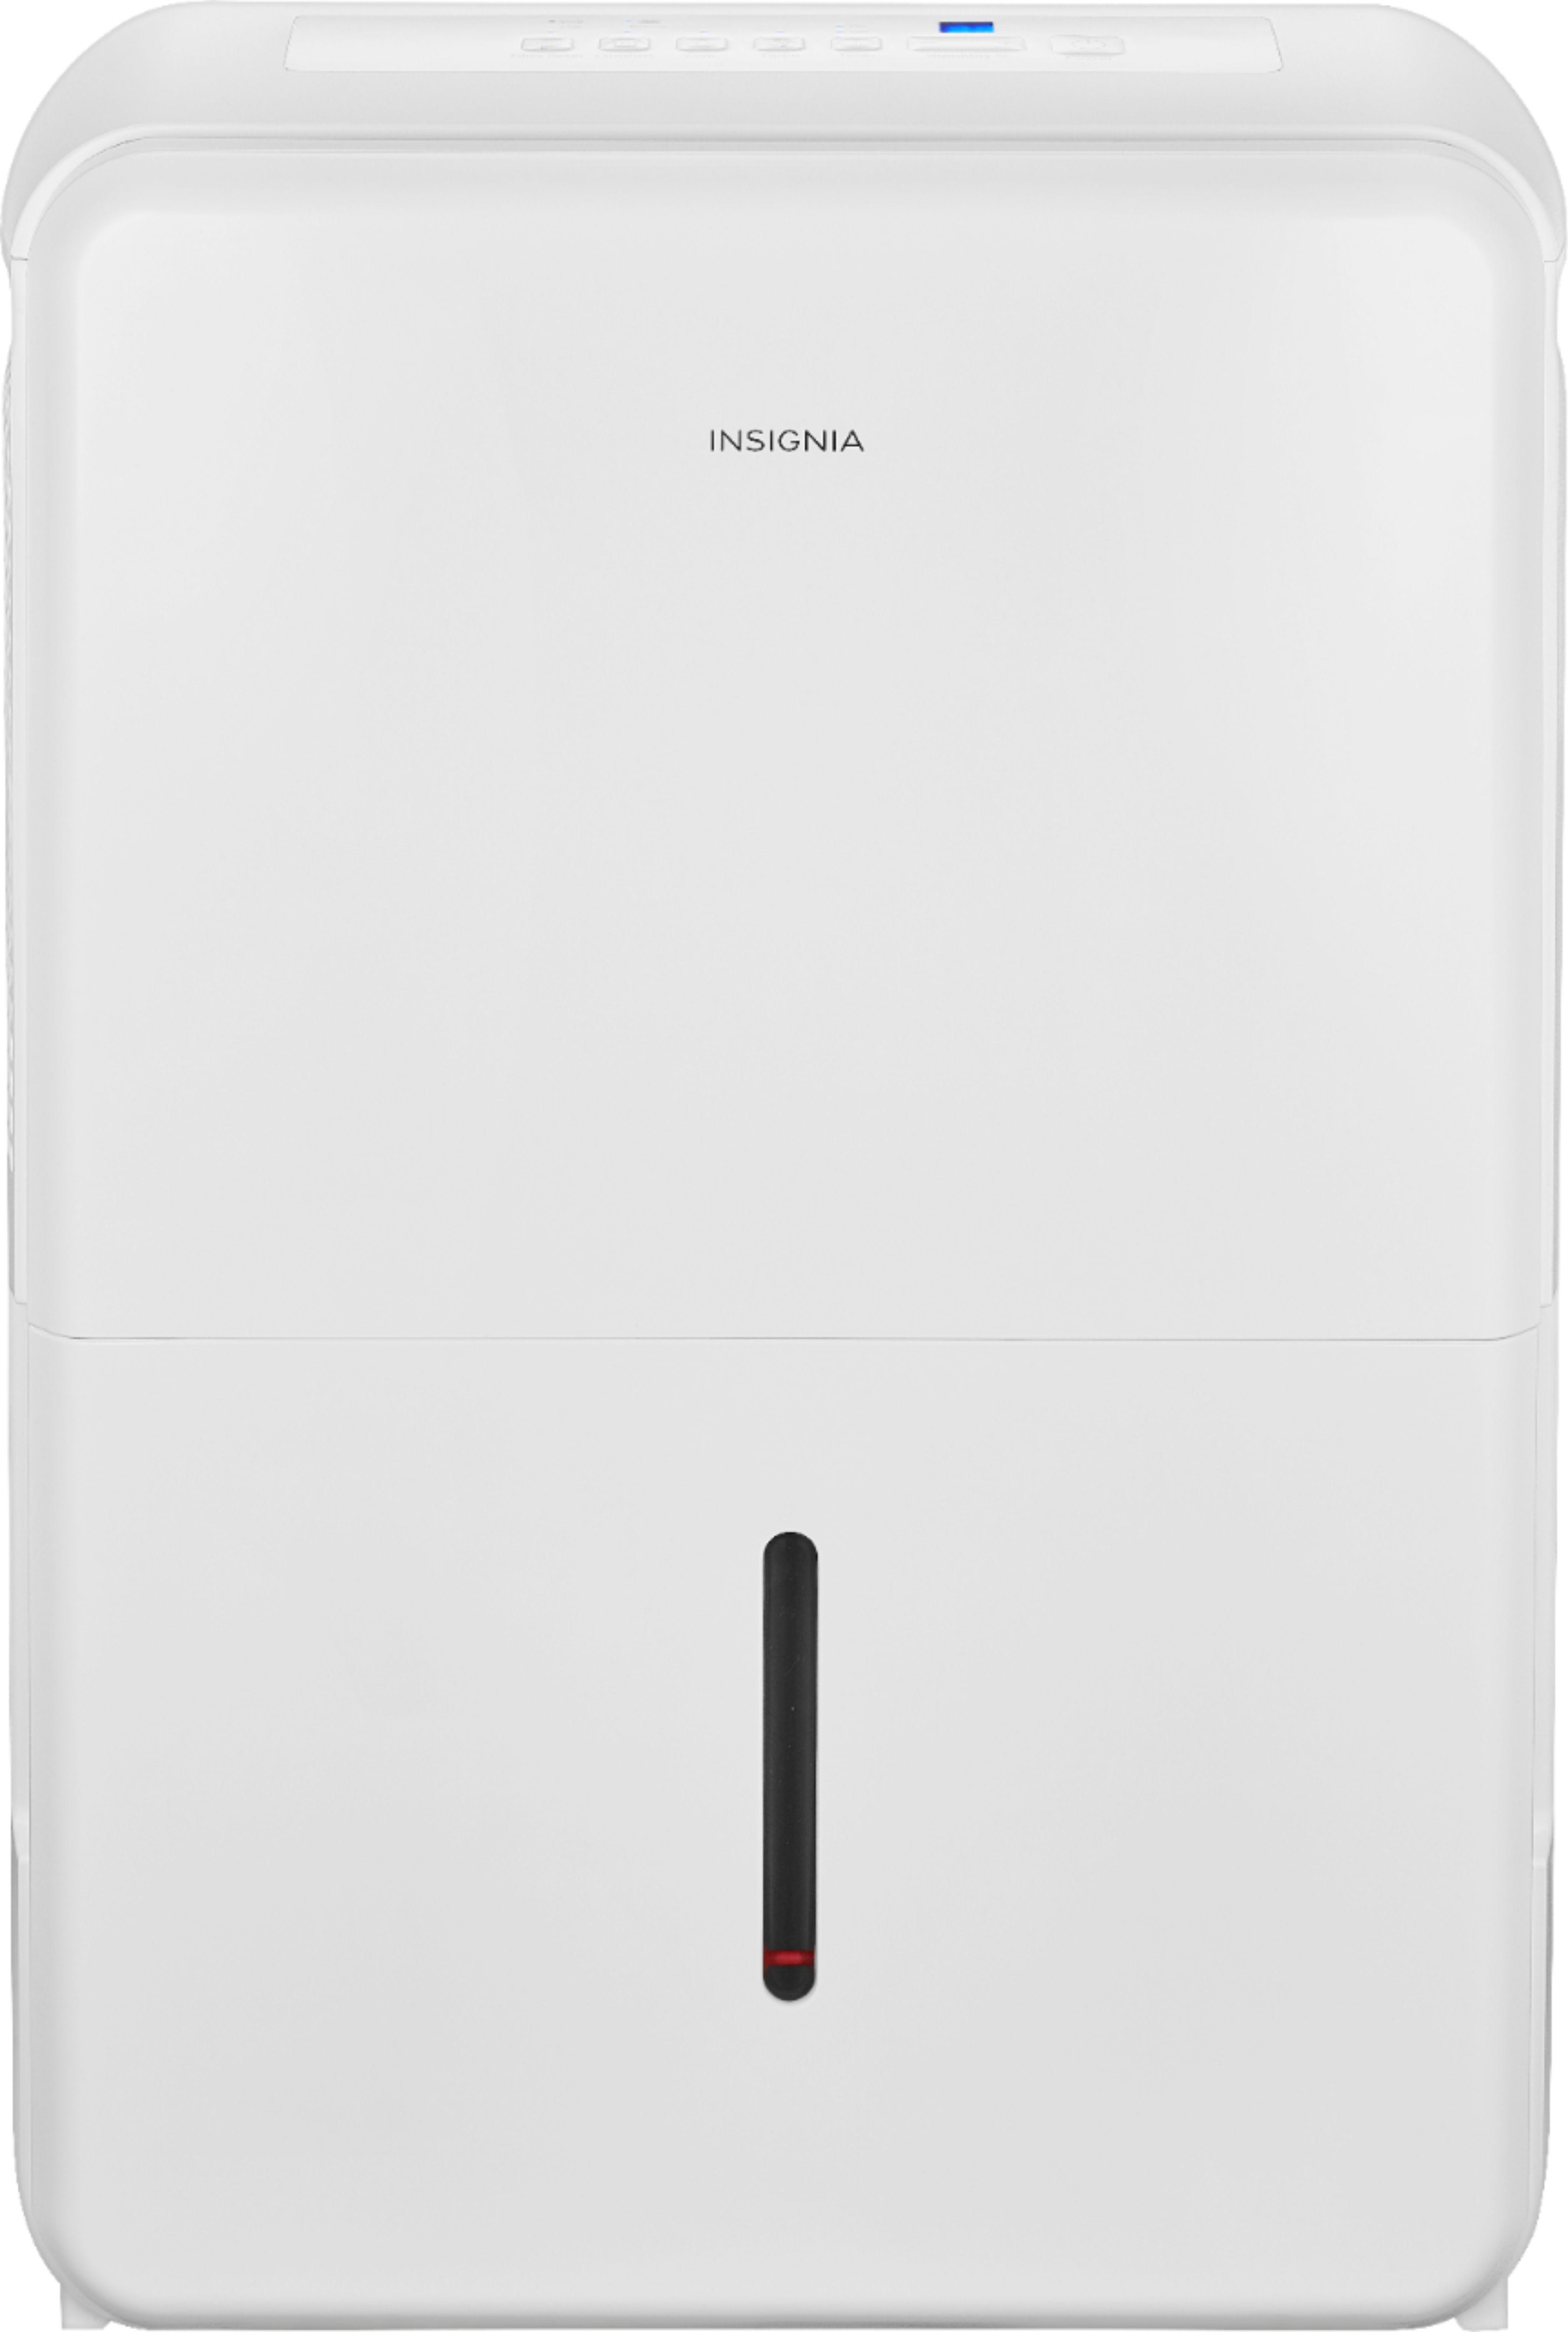 Breathe easy with this discounted Insignia dehumidifier from Best Buy